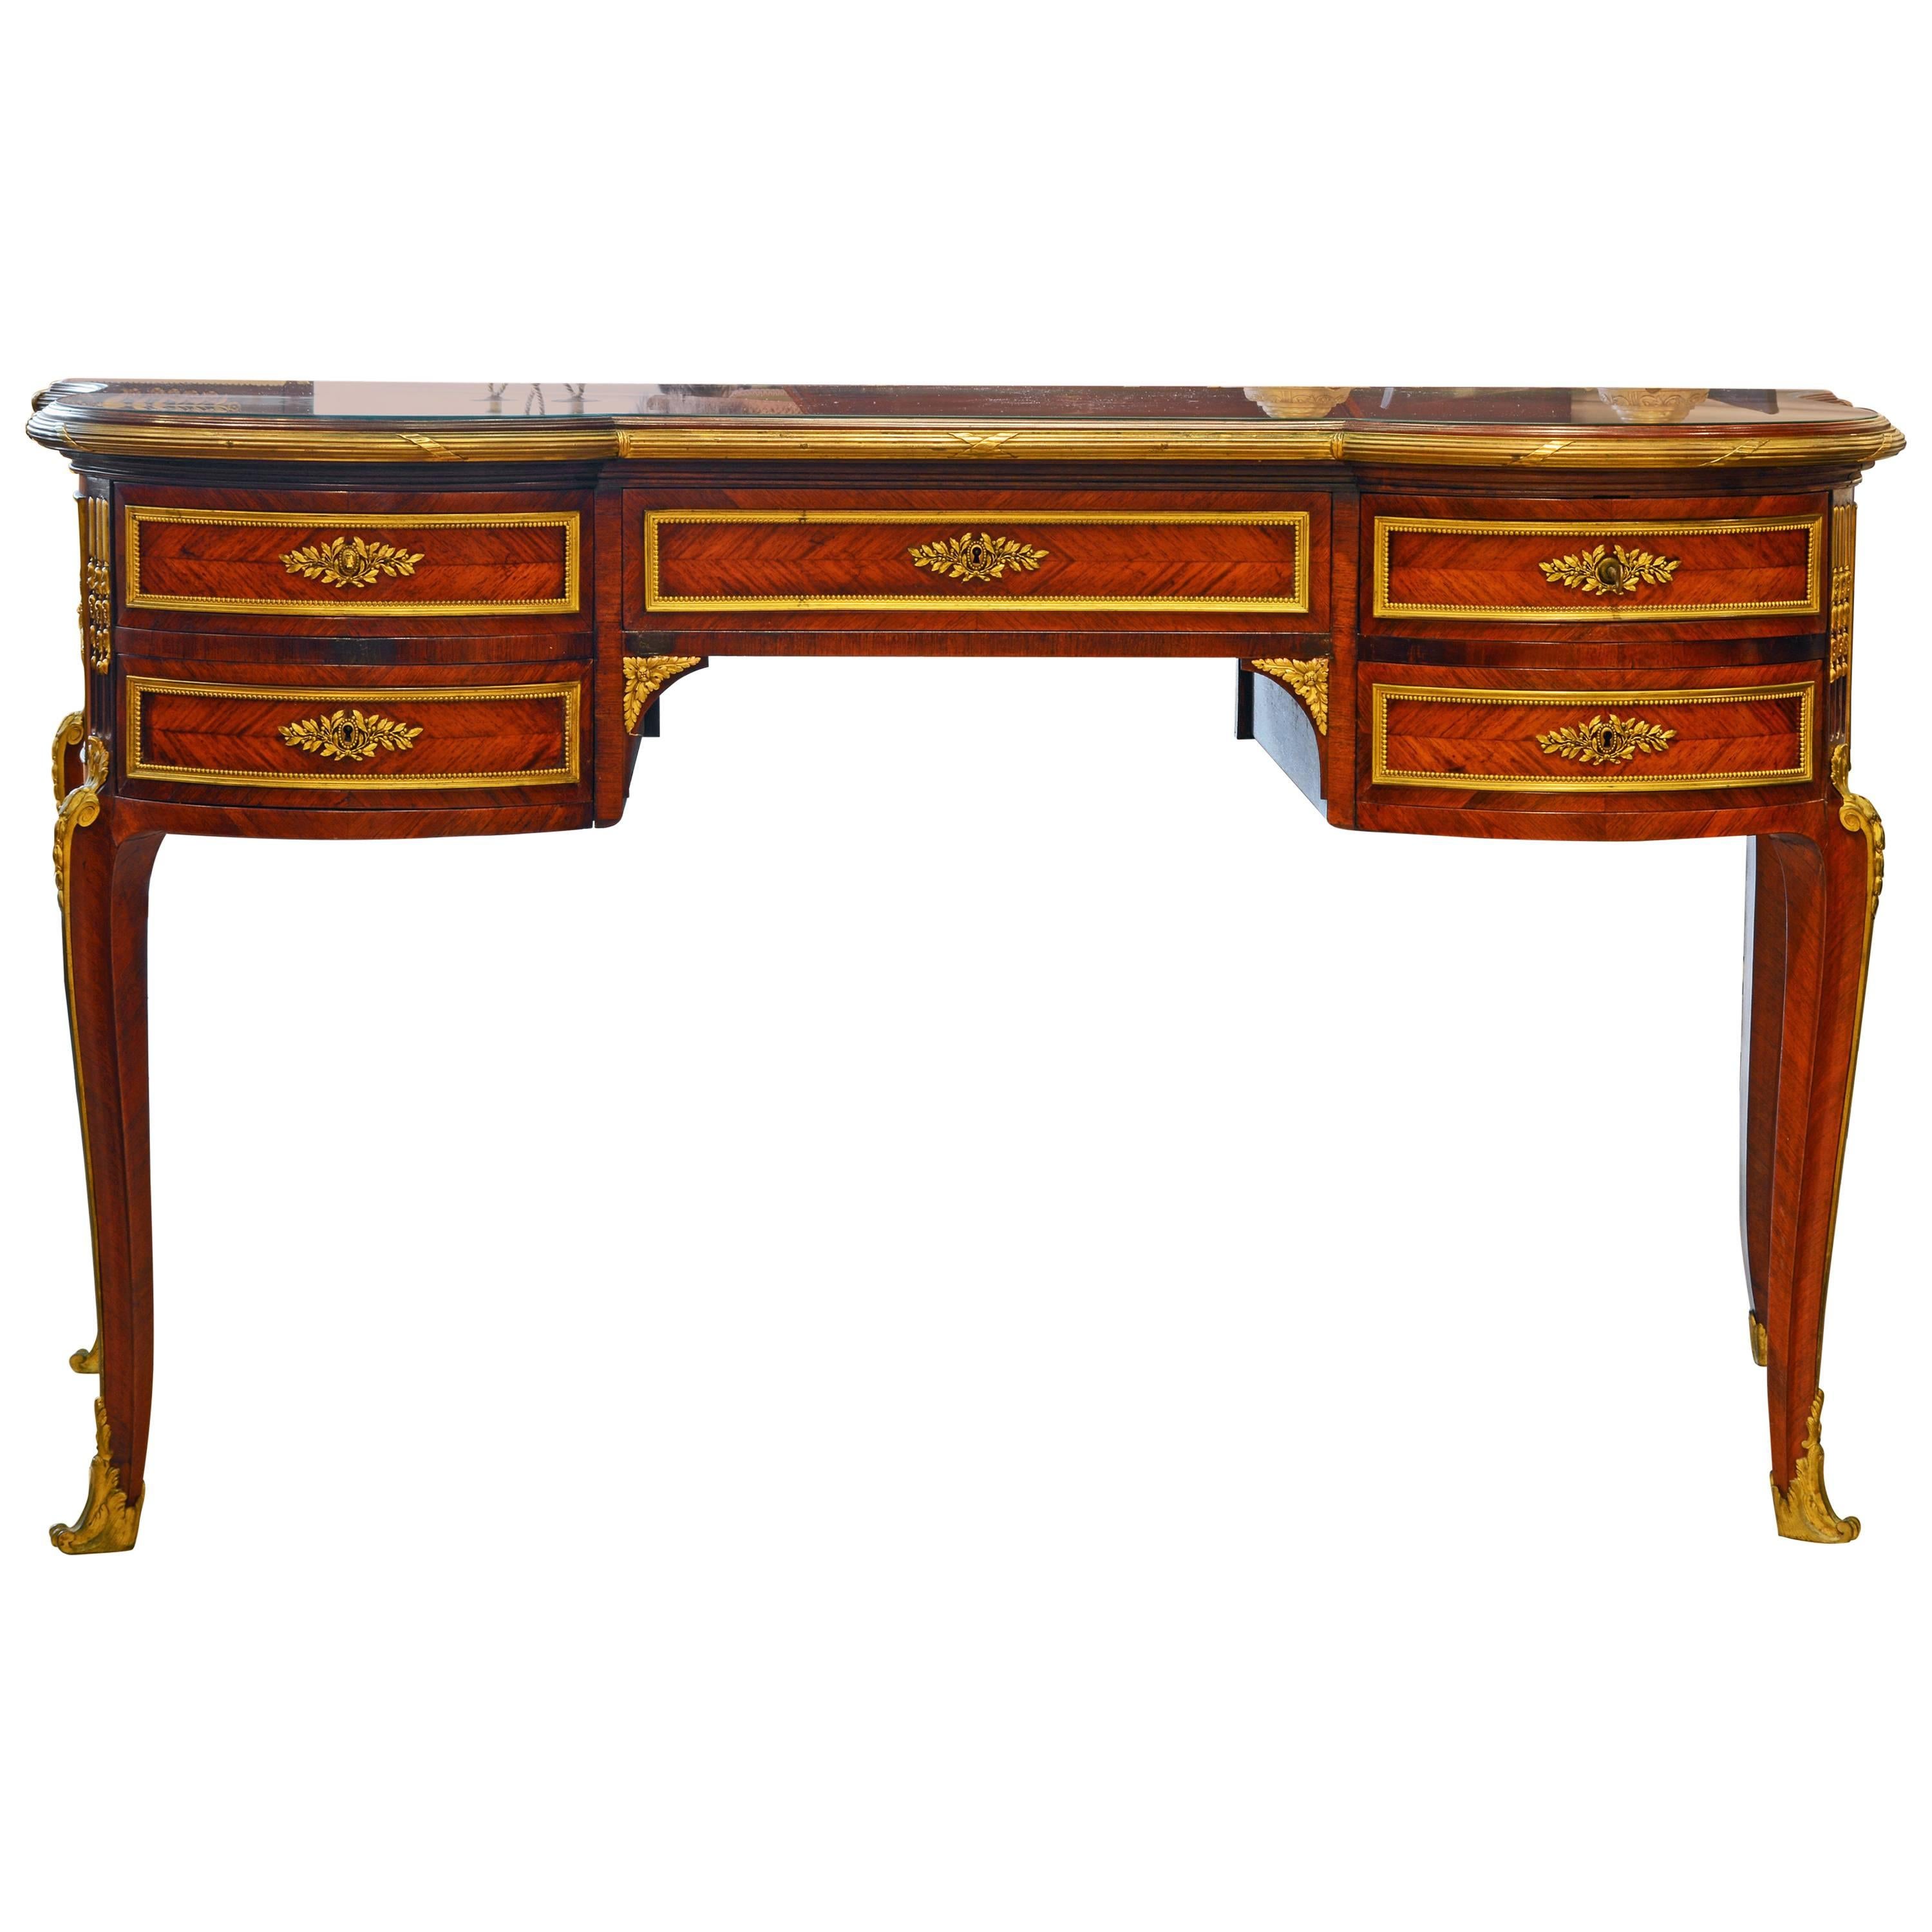 19th Century French Louis XV Bronze-Mounted Kingwood Parquetry Writing Desk